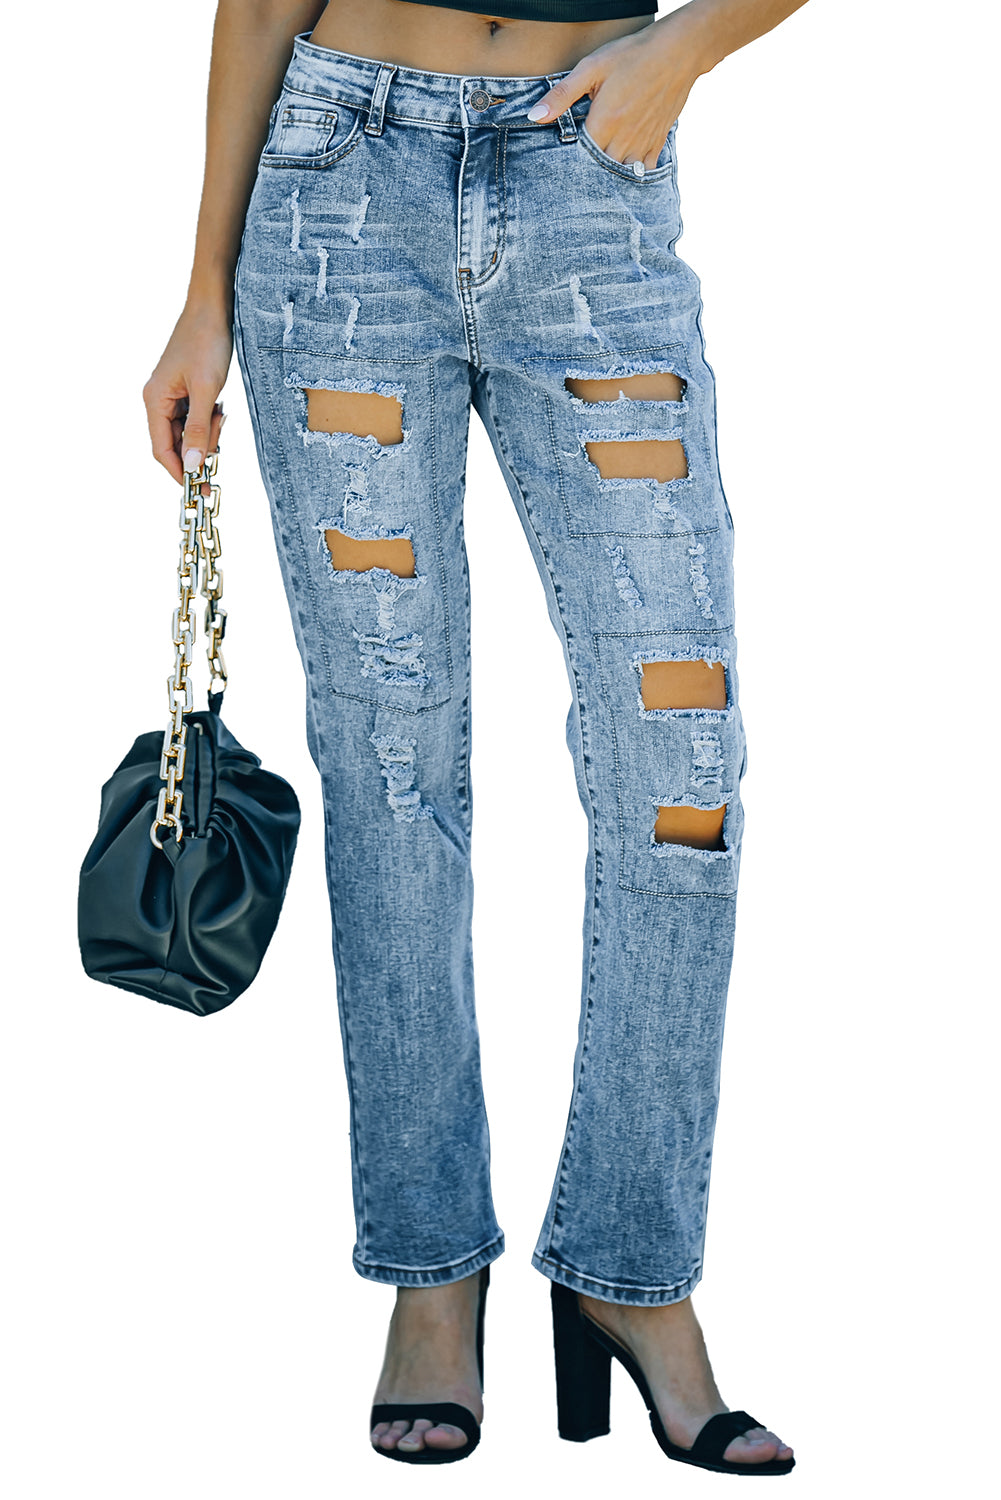 Blue Women's Ripped Boyfriend Jeans Buttoned Pockets Distressed Jeans LC782725-5